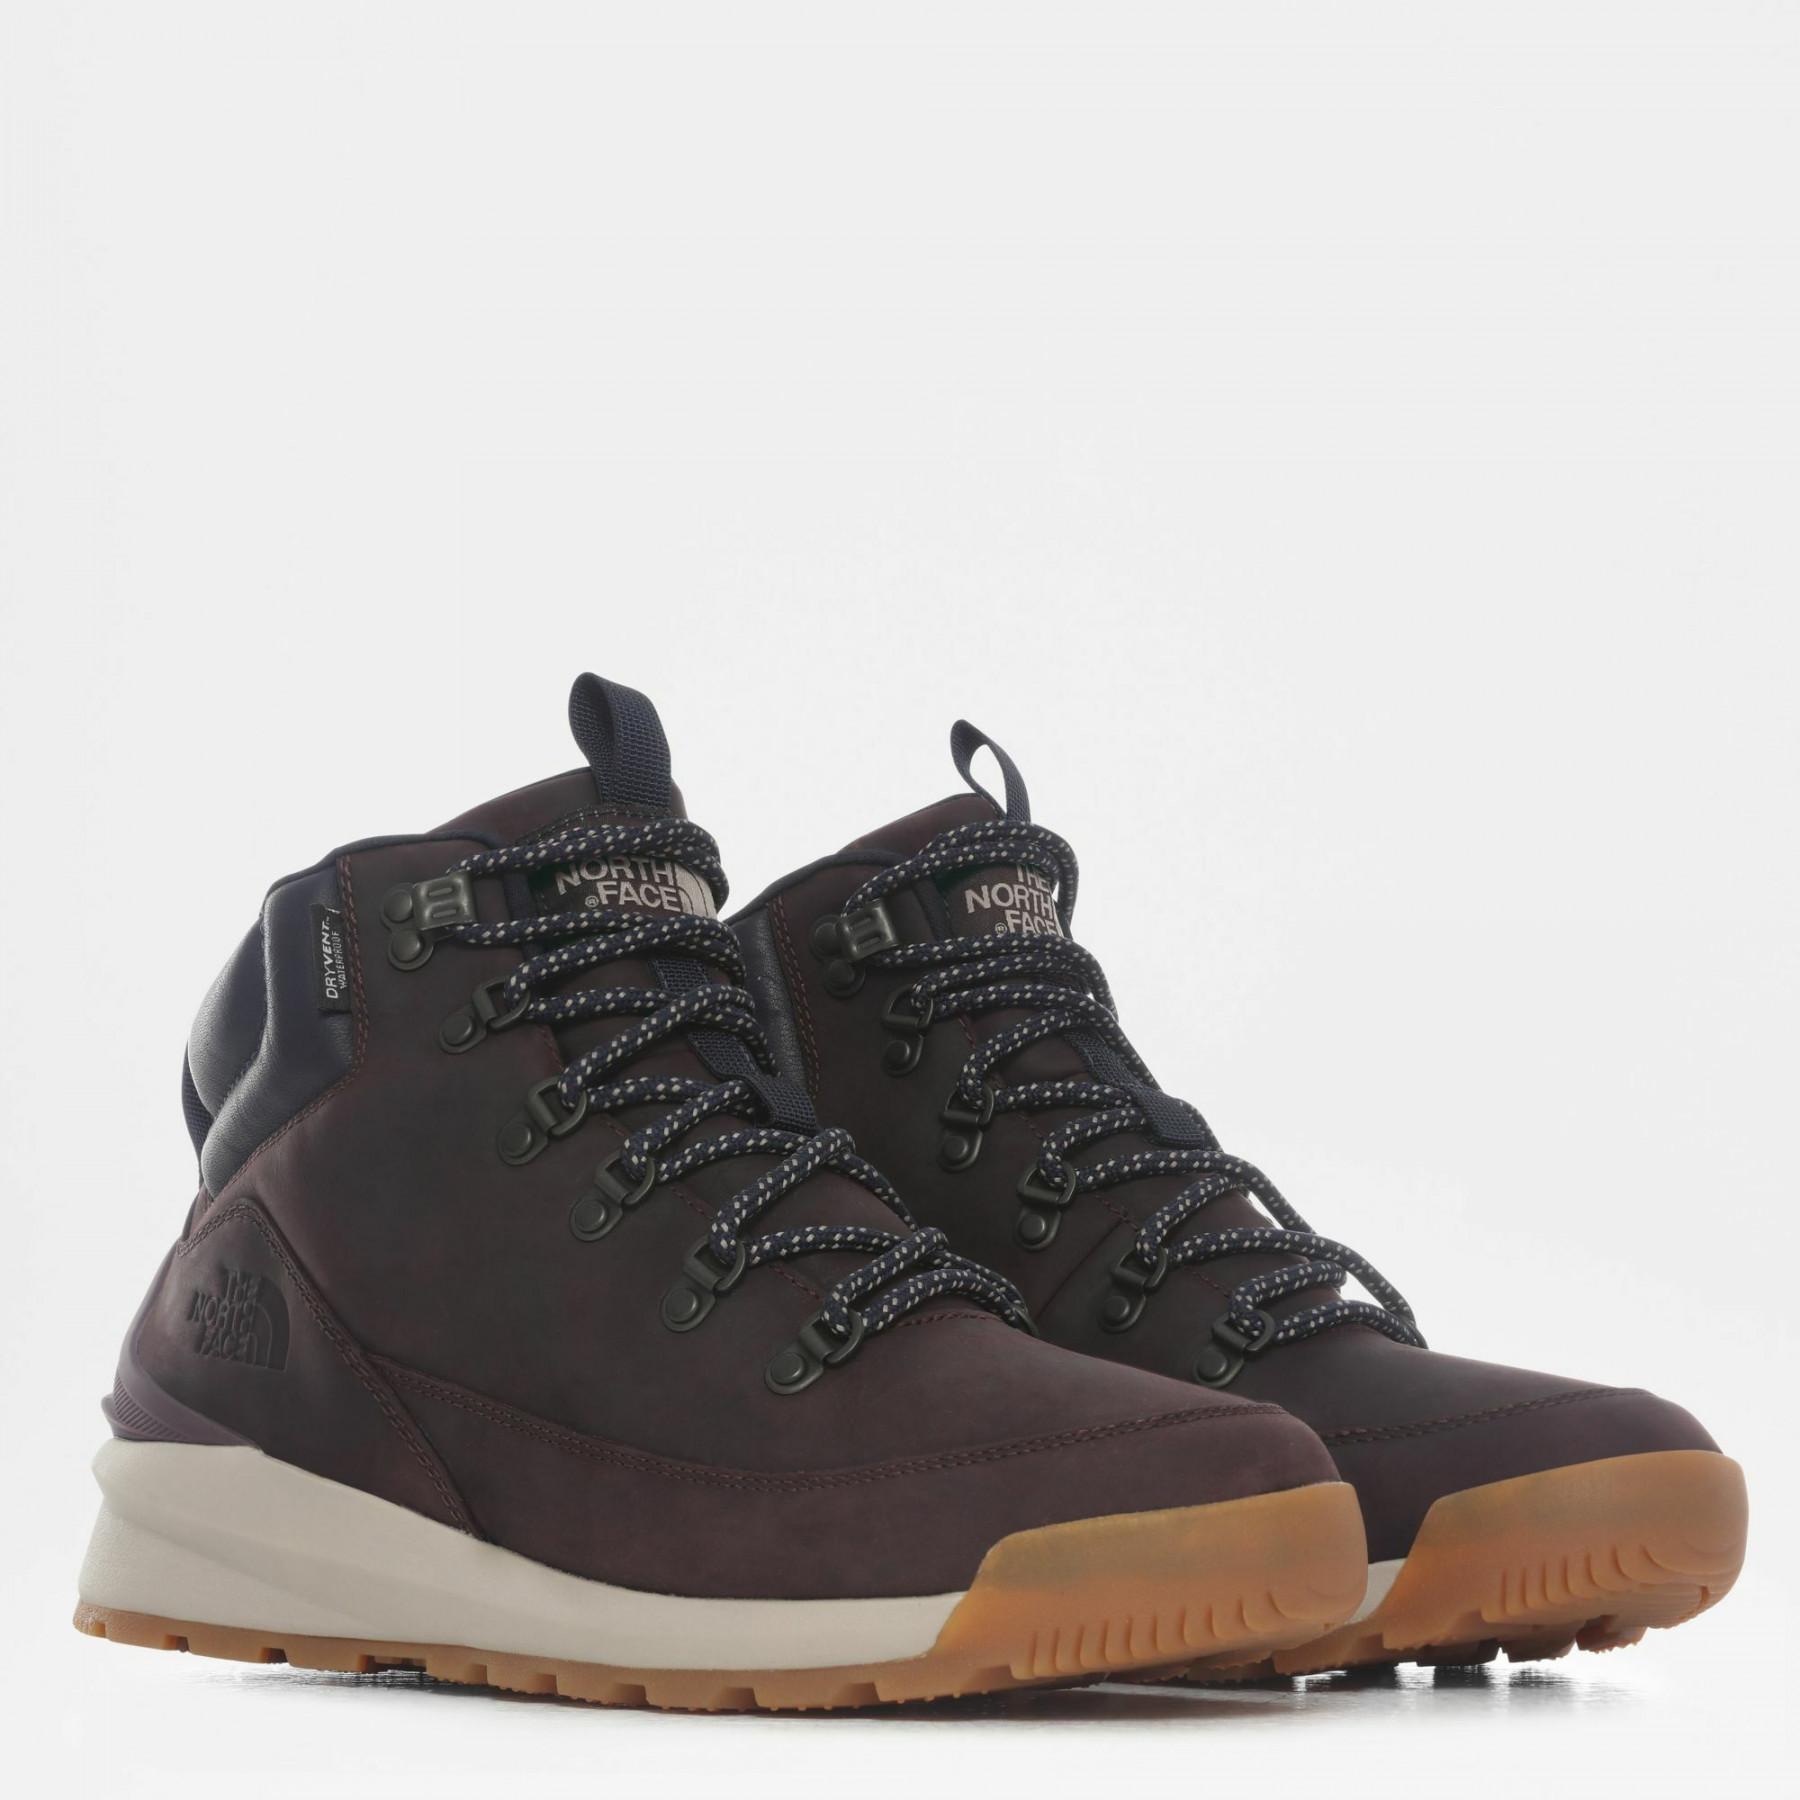 Baskets The North Face Premium waterproof-leather